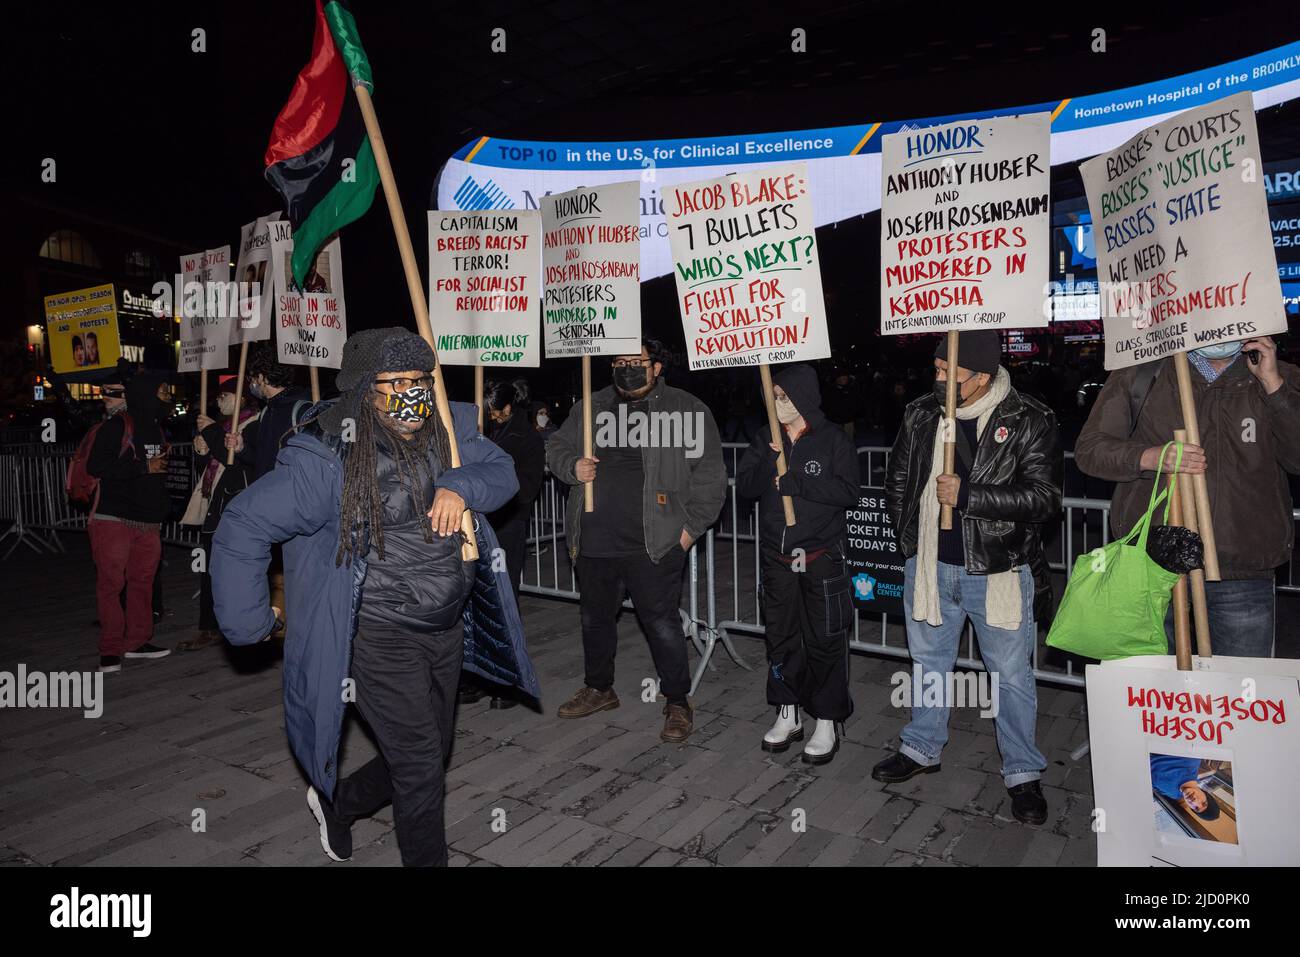 BROOKLYN, N.Y. – November 19, 2021: Demonstrators gather in Brooklyn to protest the verdict in the trial of Kyle Rittenhouse in Kenosha, Wisconsin. Stock Photo